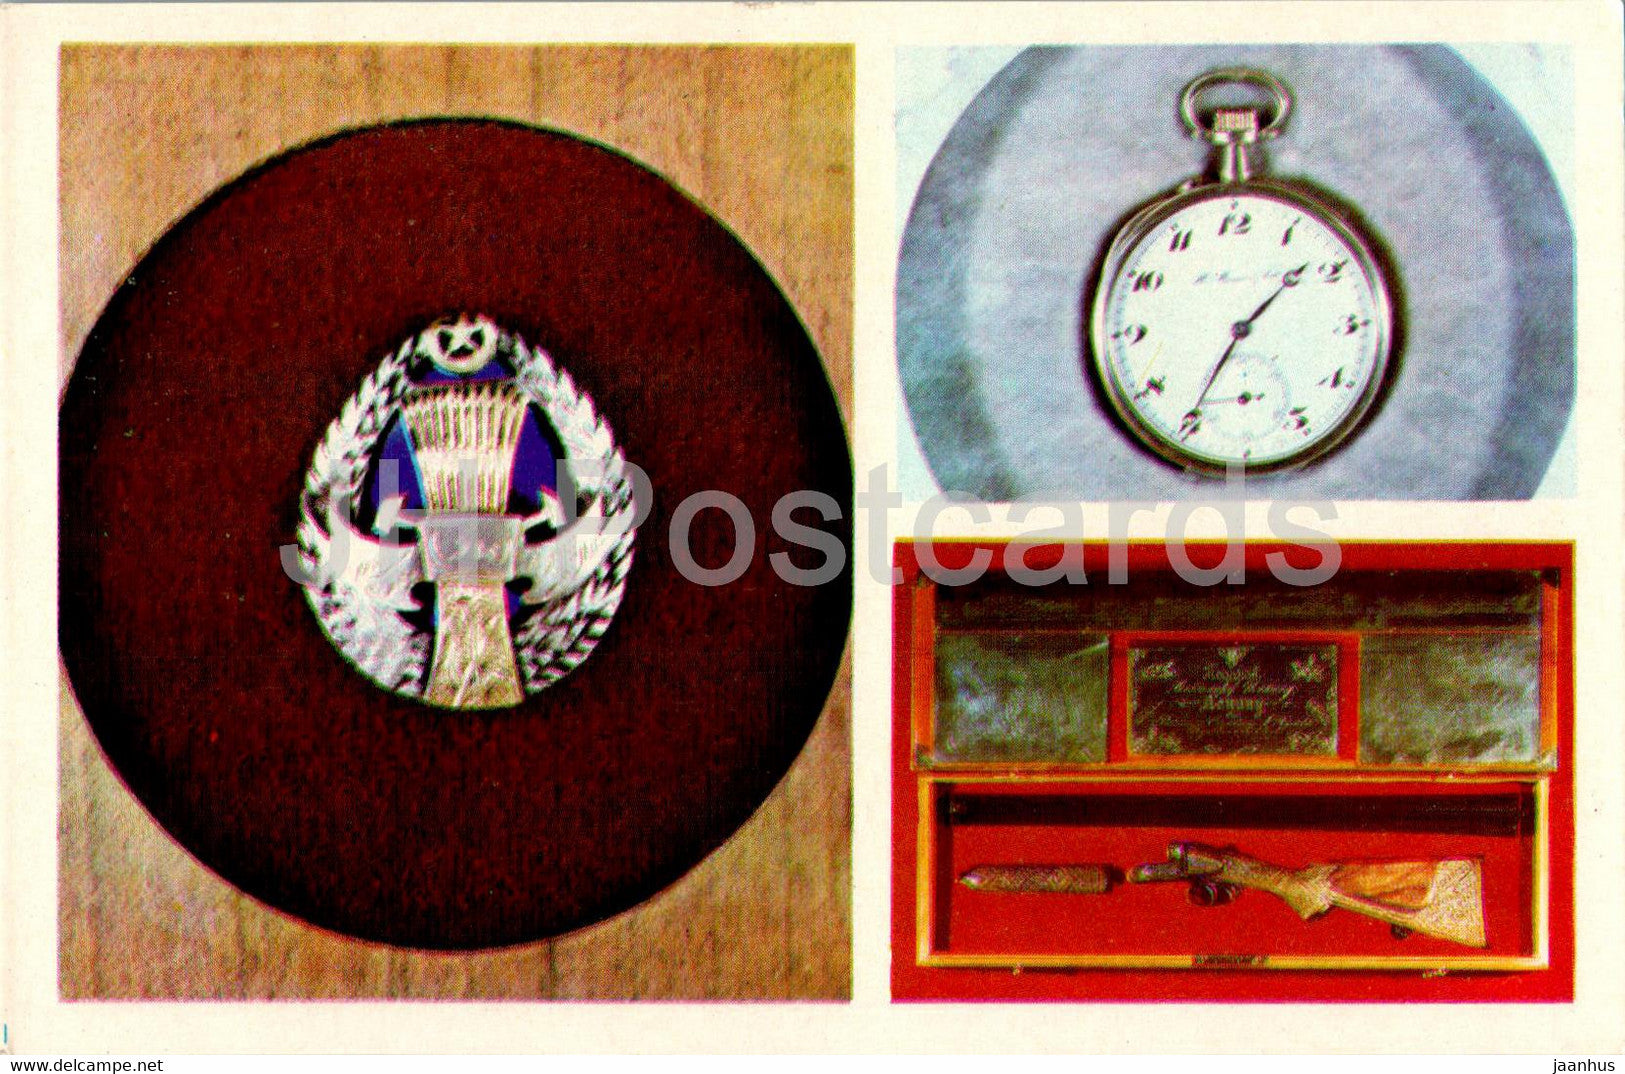 Moscow - Lenin Central Museum - Order of Labor - Lenin's Watch - Gun - gifts - 1978 - Russia USSR - unused - JH Postcards